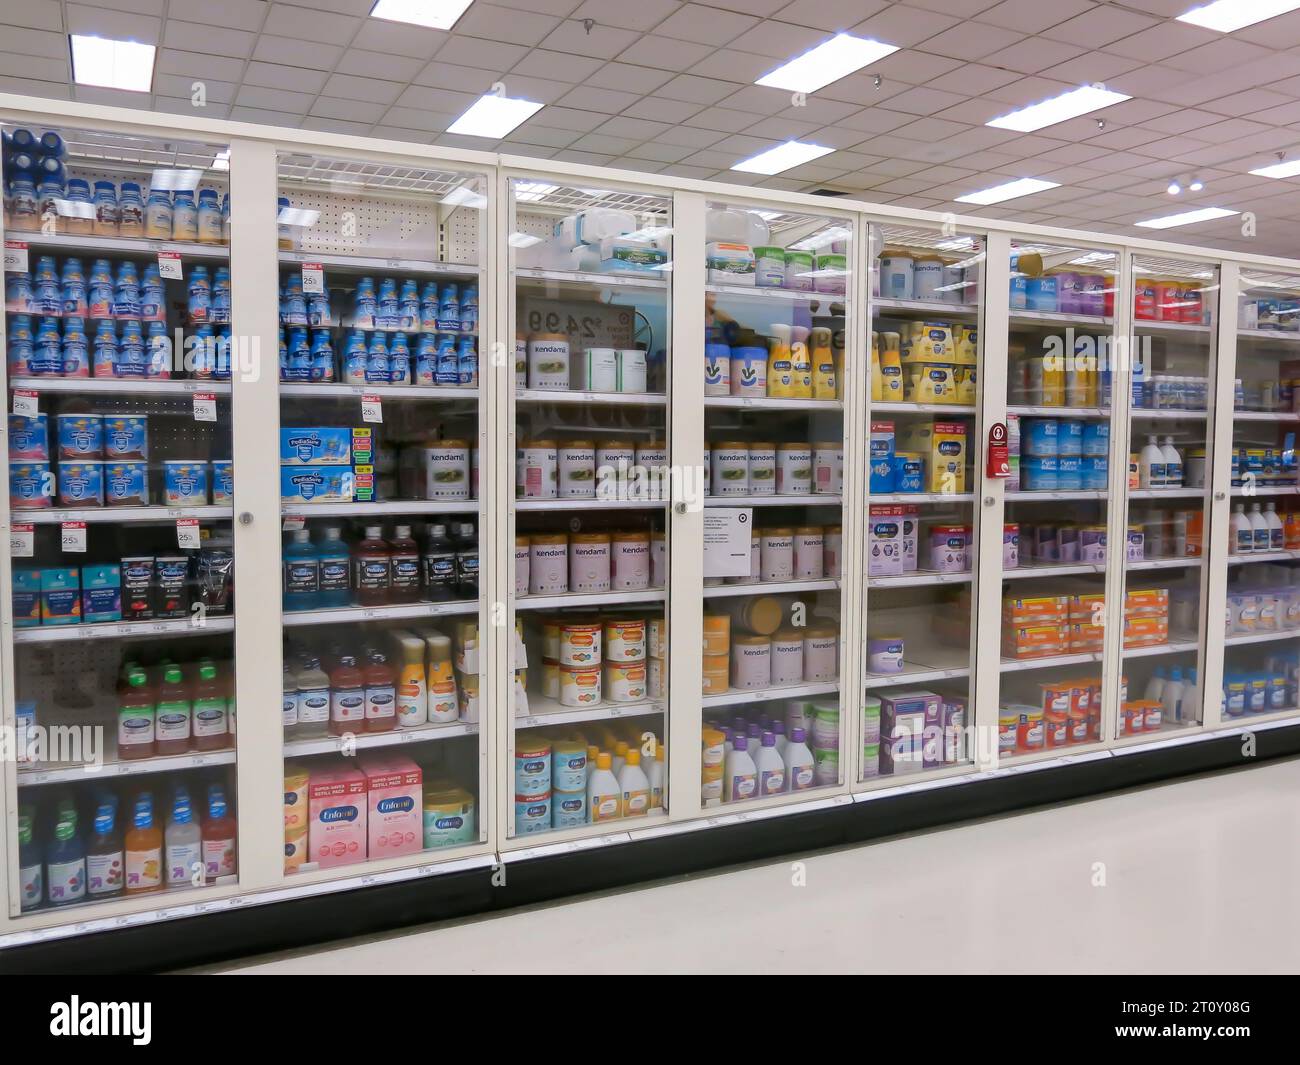 Locked Cabinets in Retail Store to Deter Shoplifting - Baby Formula Stock Photo